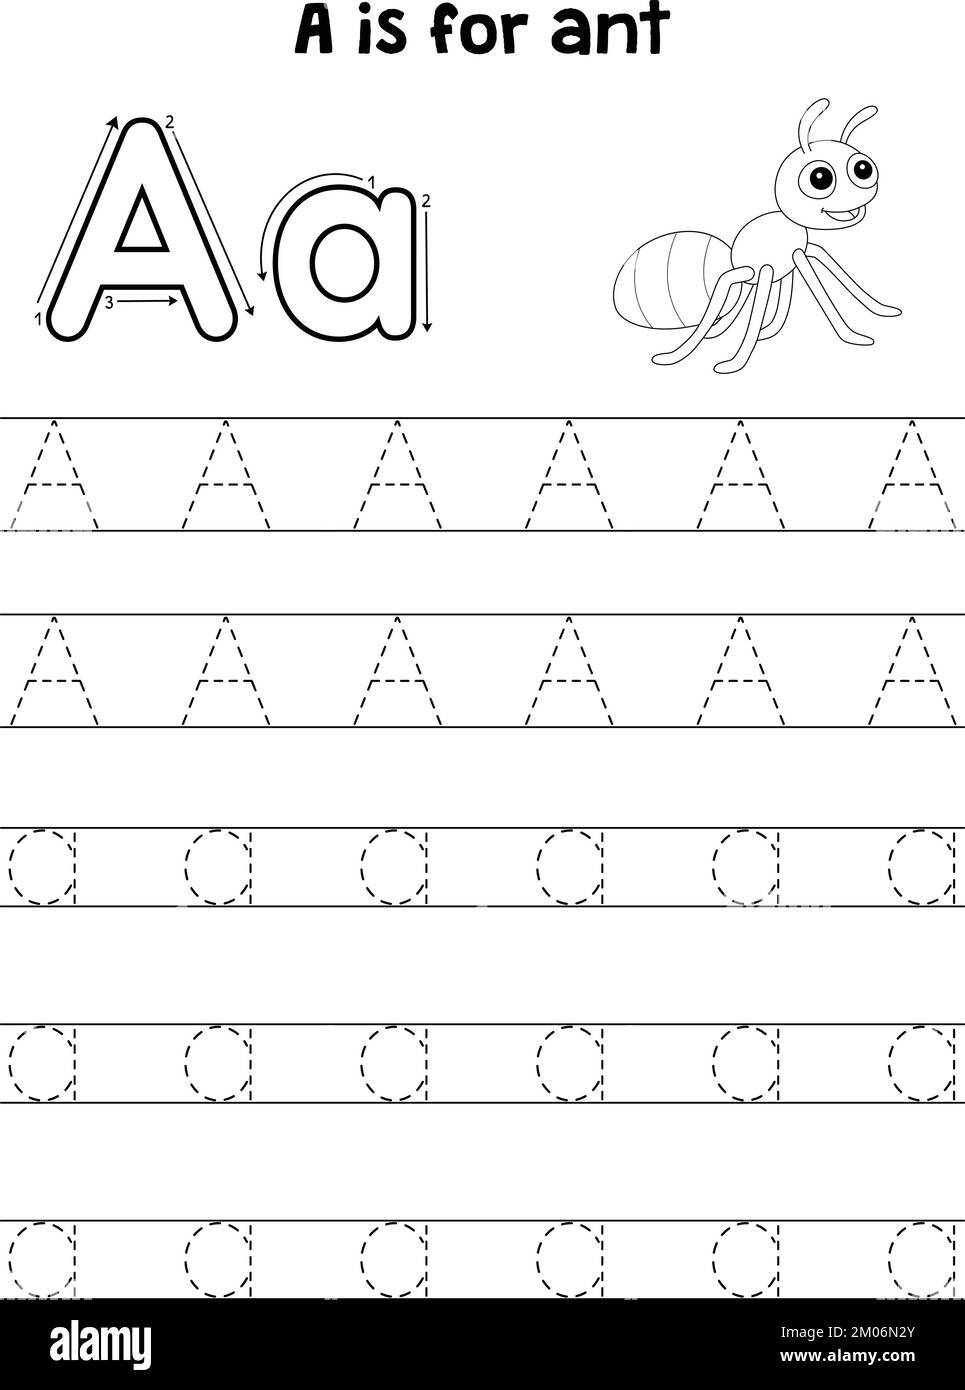 Ant Animal Tracing Letter ABC Coloring Page A Stock Vector Image & Art ...